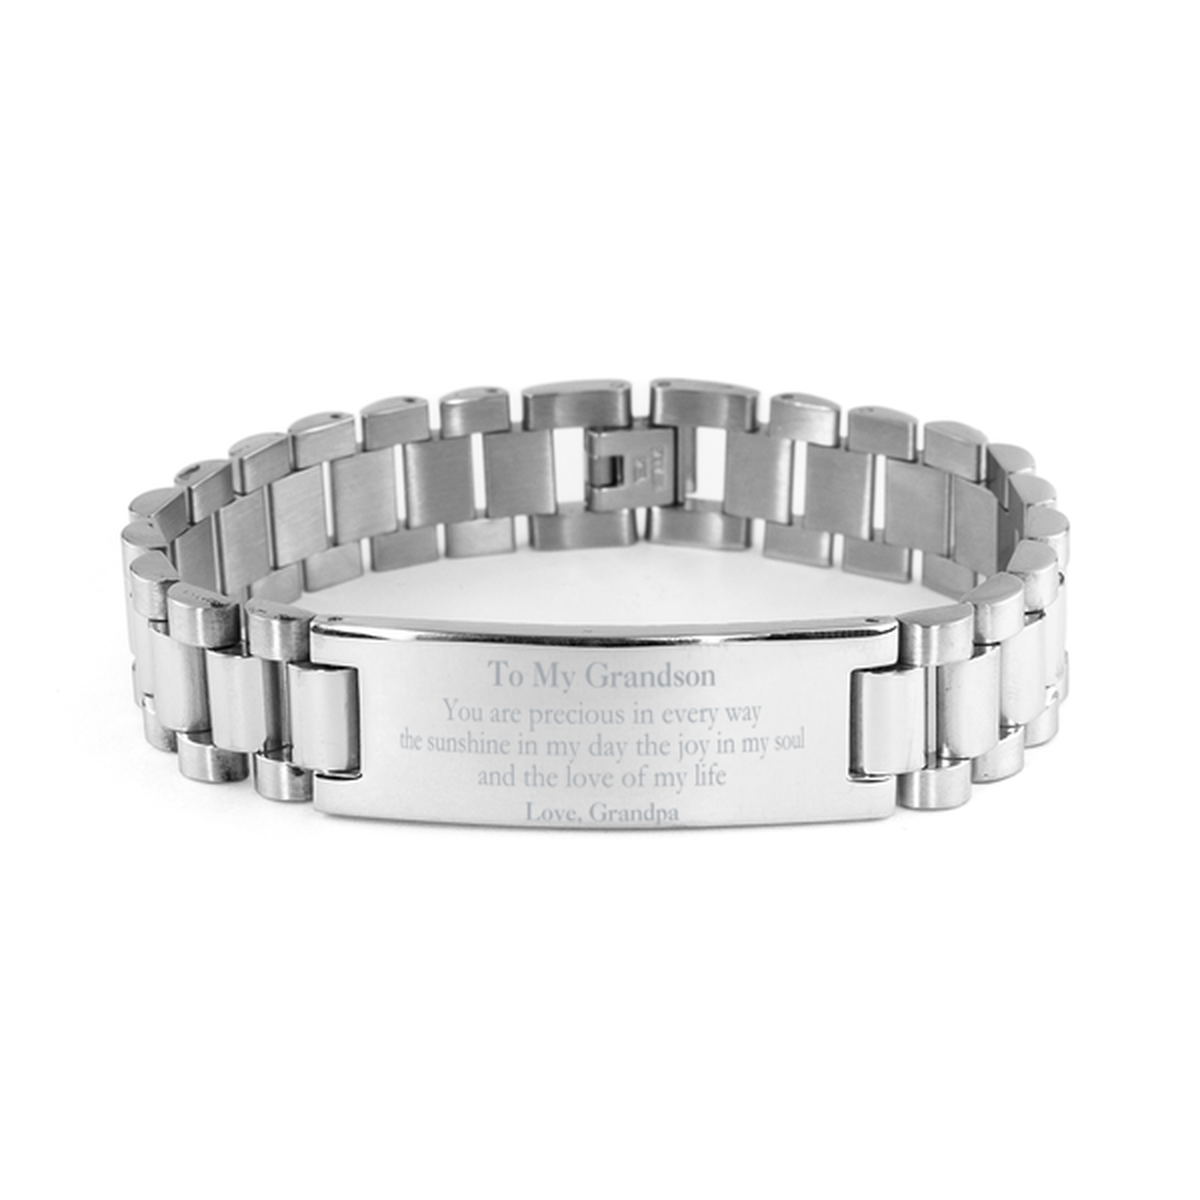 Graduation Gifts for Grandson Ladder Stainless Steel Bracelet Present from Grandpa, Christmas Grandson Birthday Gifts Grandson You are precious in every way the sunshine in my day. Love, Grandpa